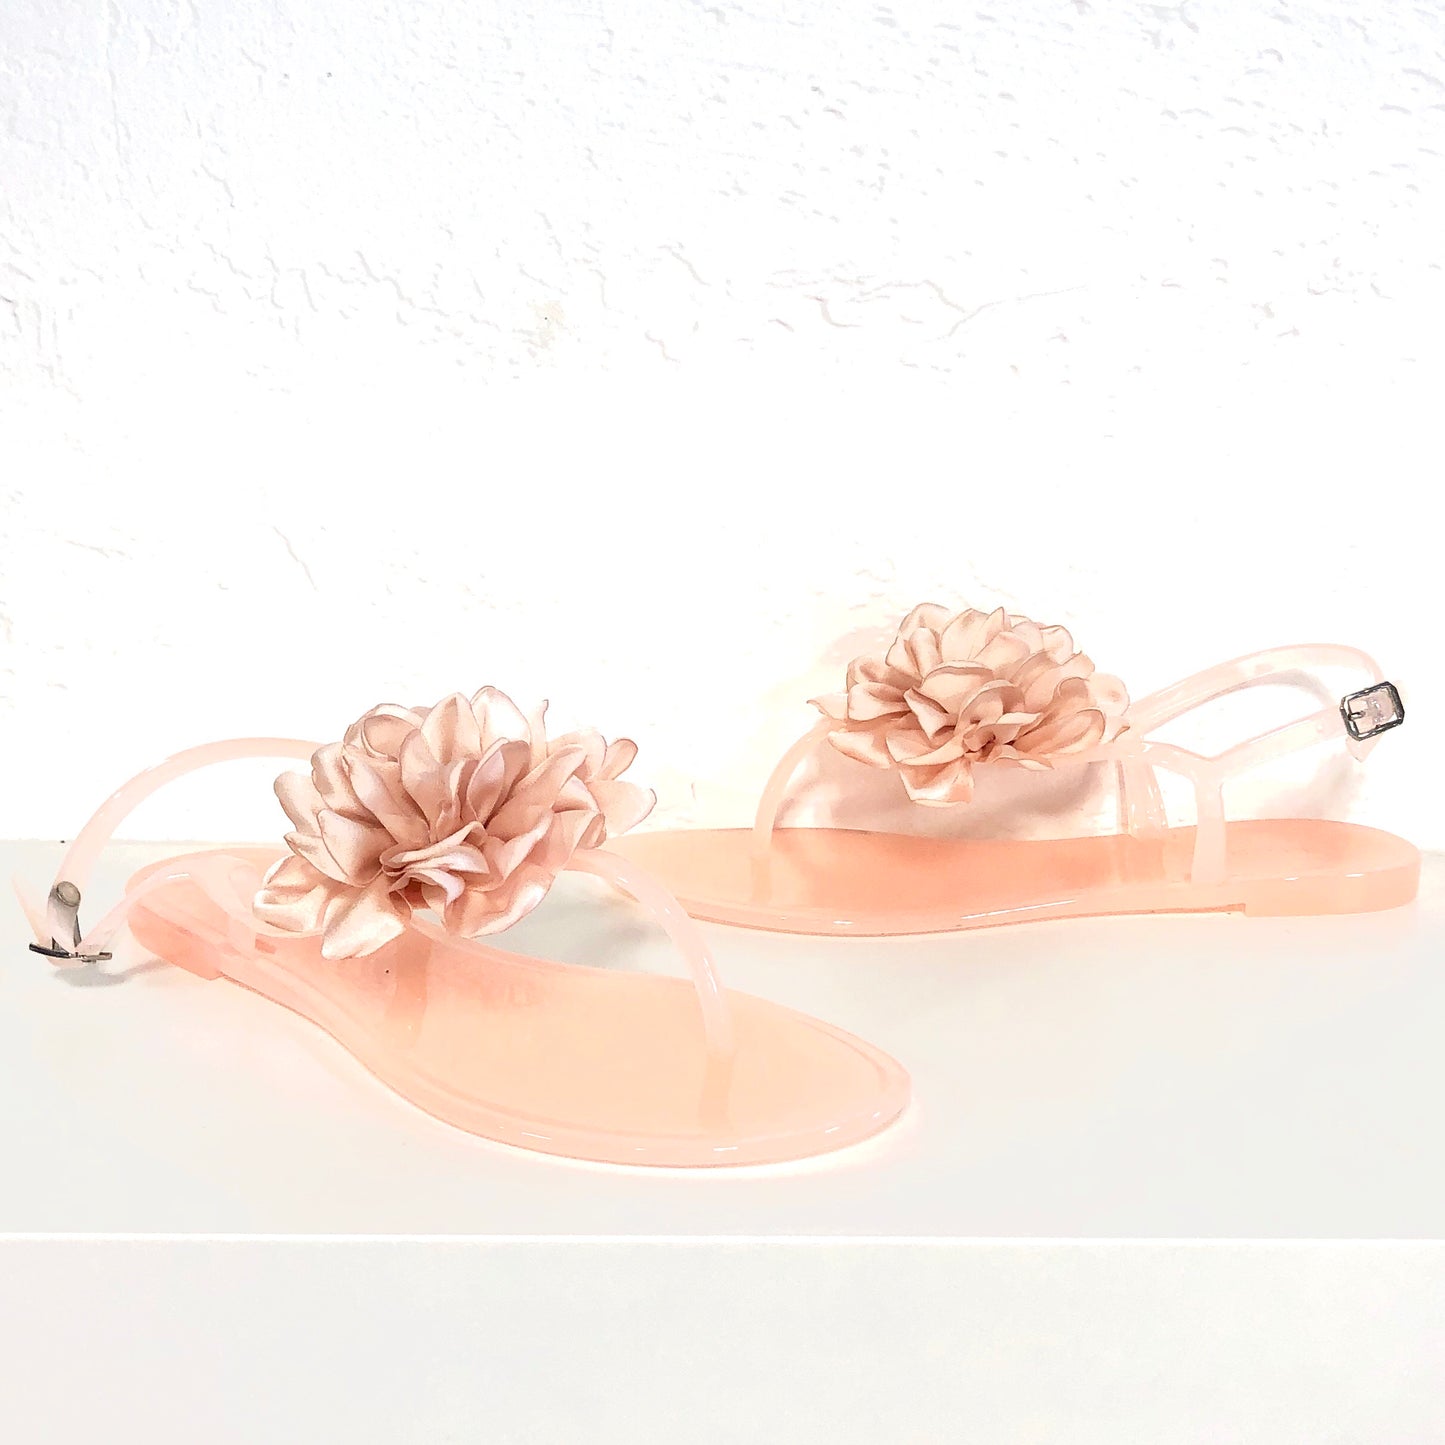 Jelli Nude Blush Pink Sandals - The Shoe Trunk